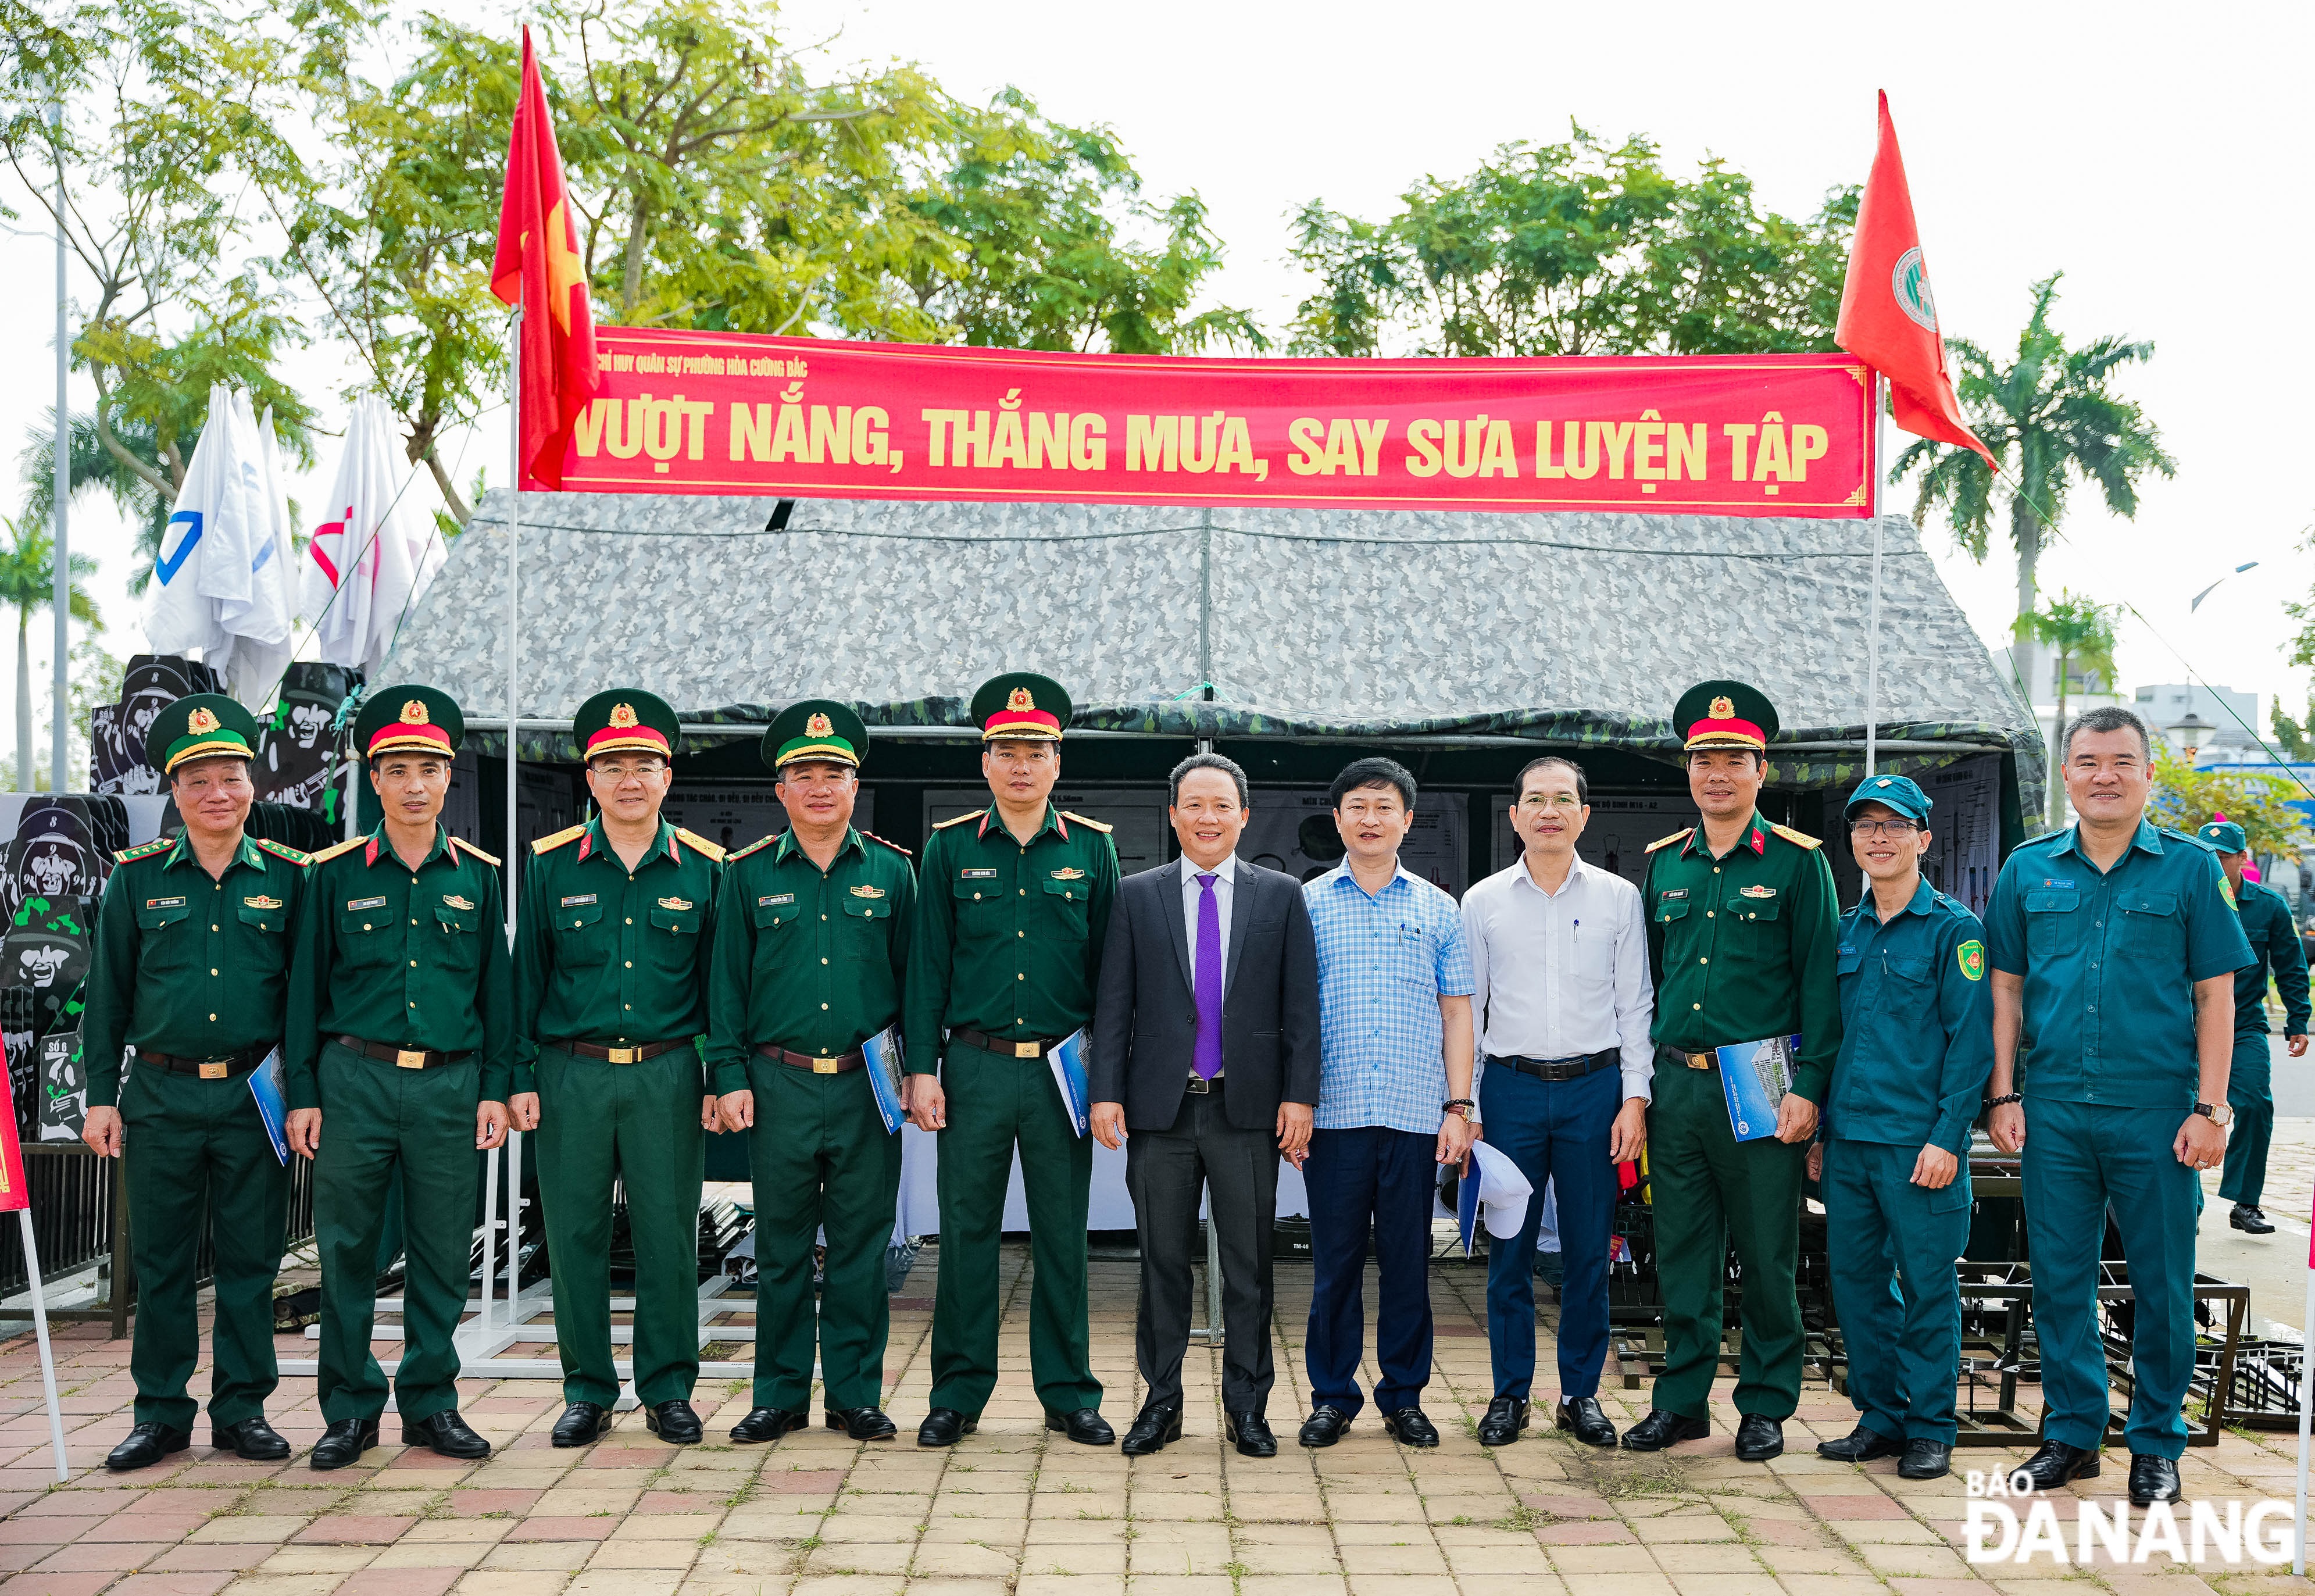 Chairman of Hai Chau District People's Committee Le Tu Gia Thanh (middle) taking a souvenir photo with the Hai Chau District Military Command and the Border Guard Command of Da Nang Port Border Gate.